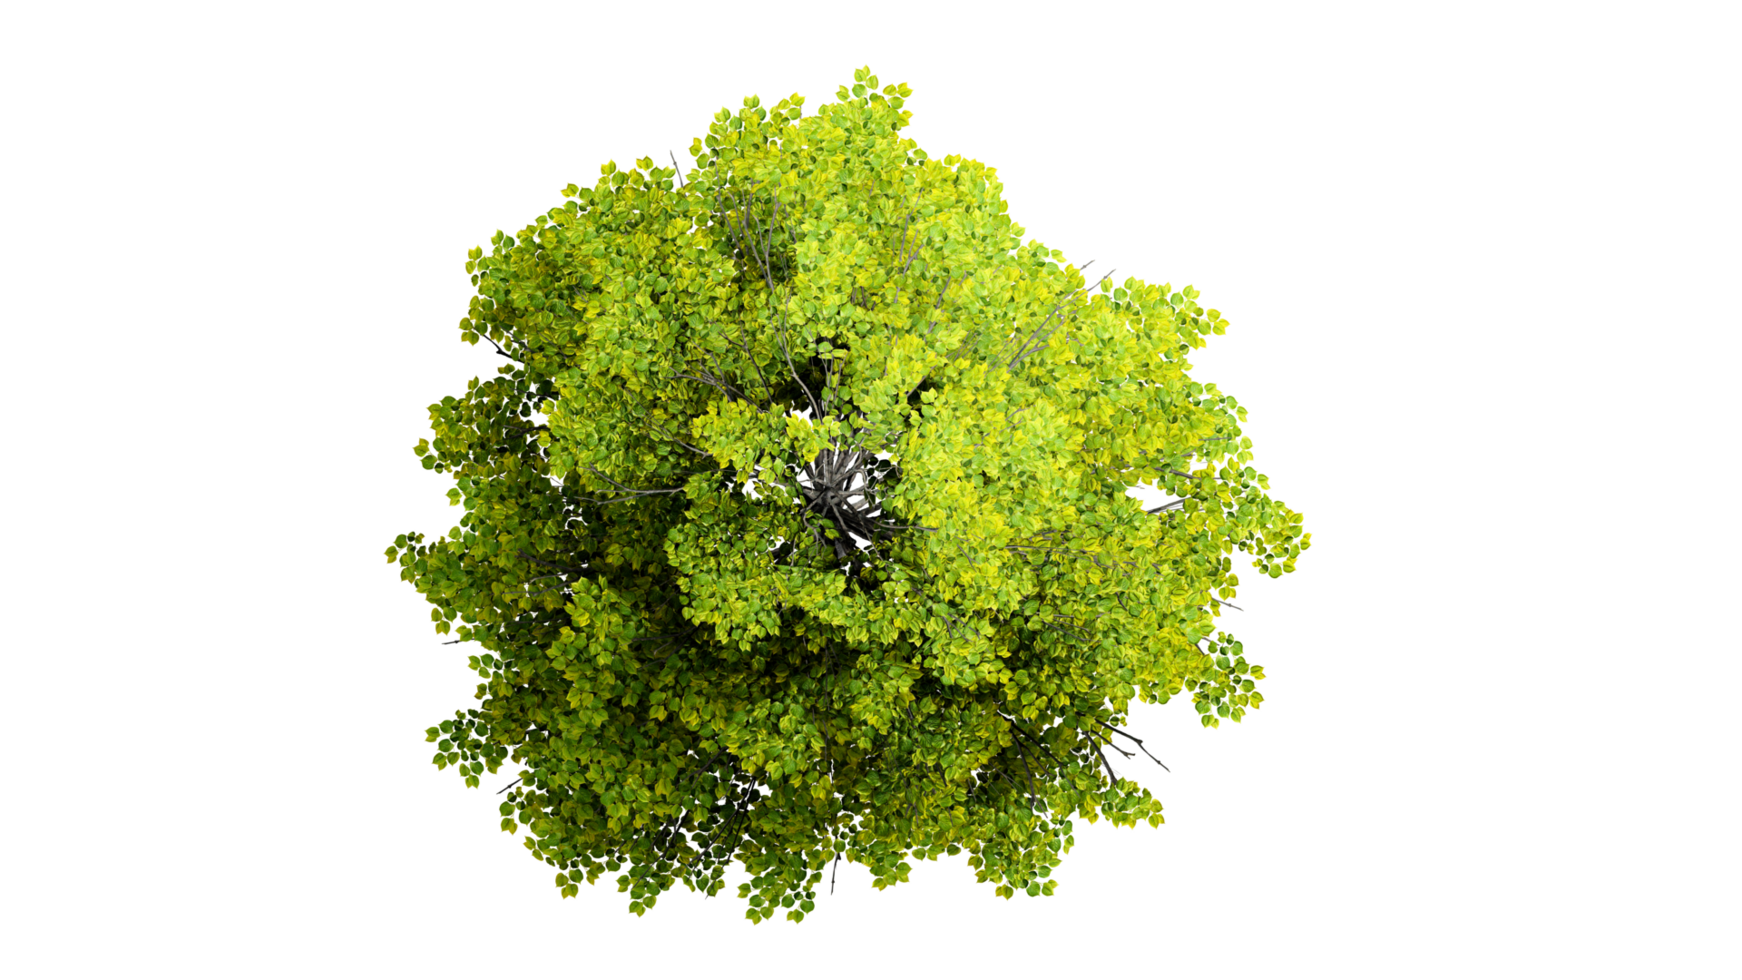 3D Top view Green Trees Isolated on PNGs transparent background , Use for visualization in architectural design or garden decorate